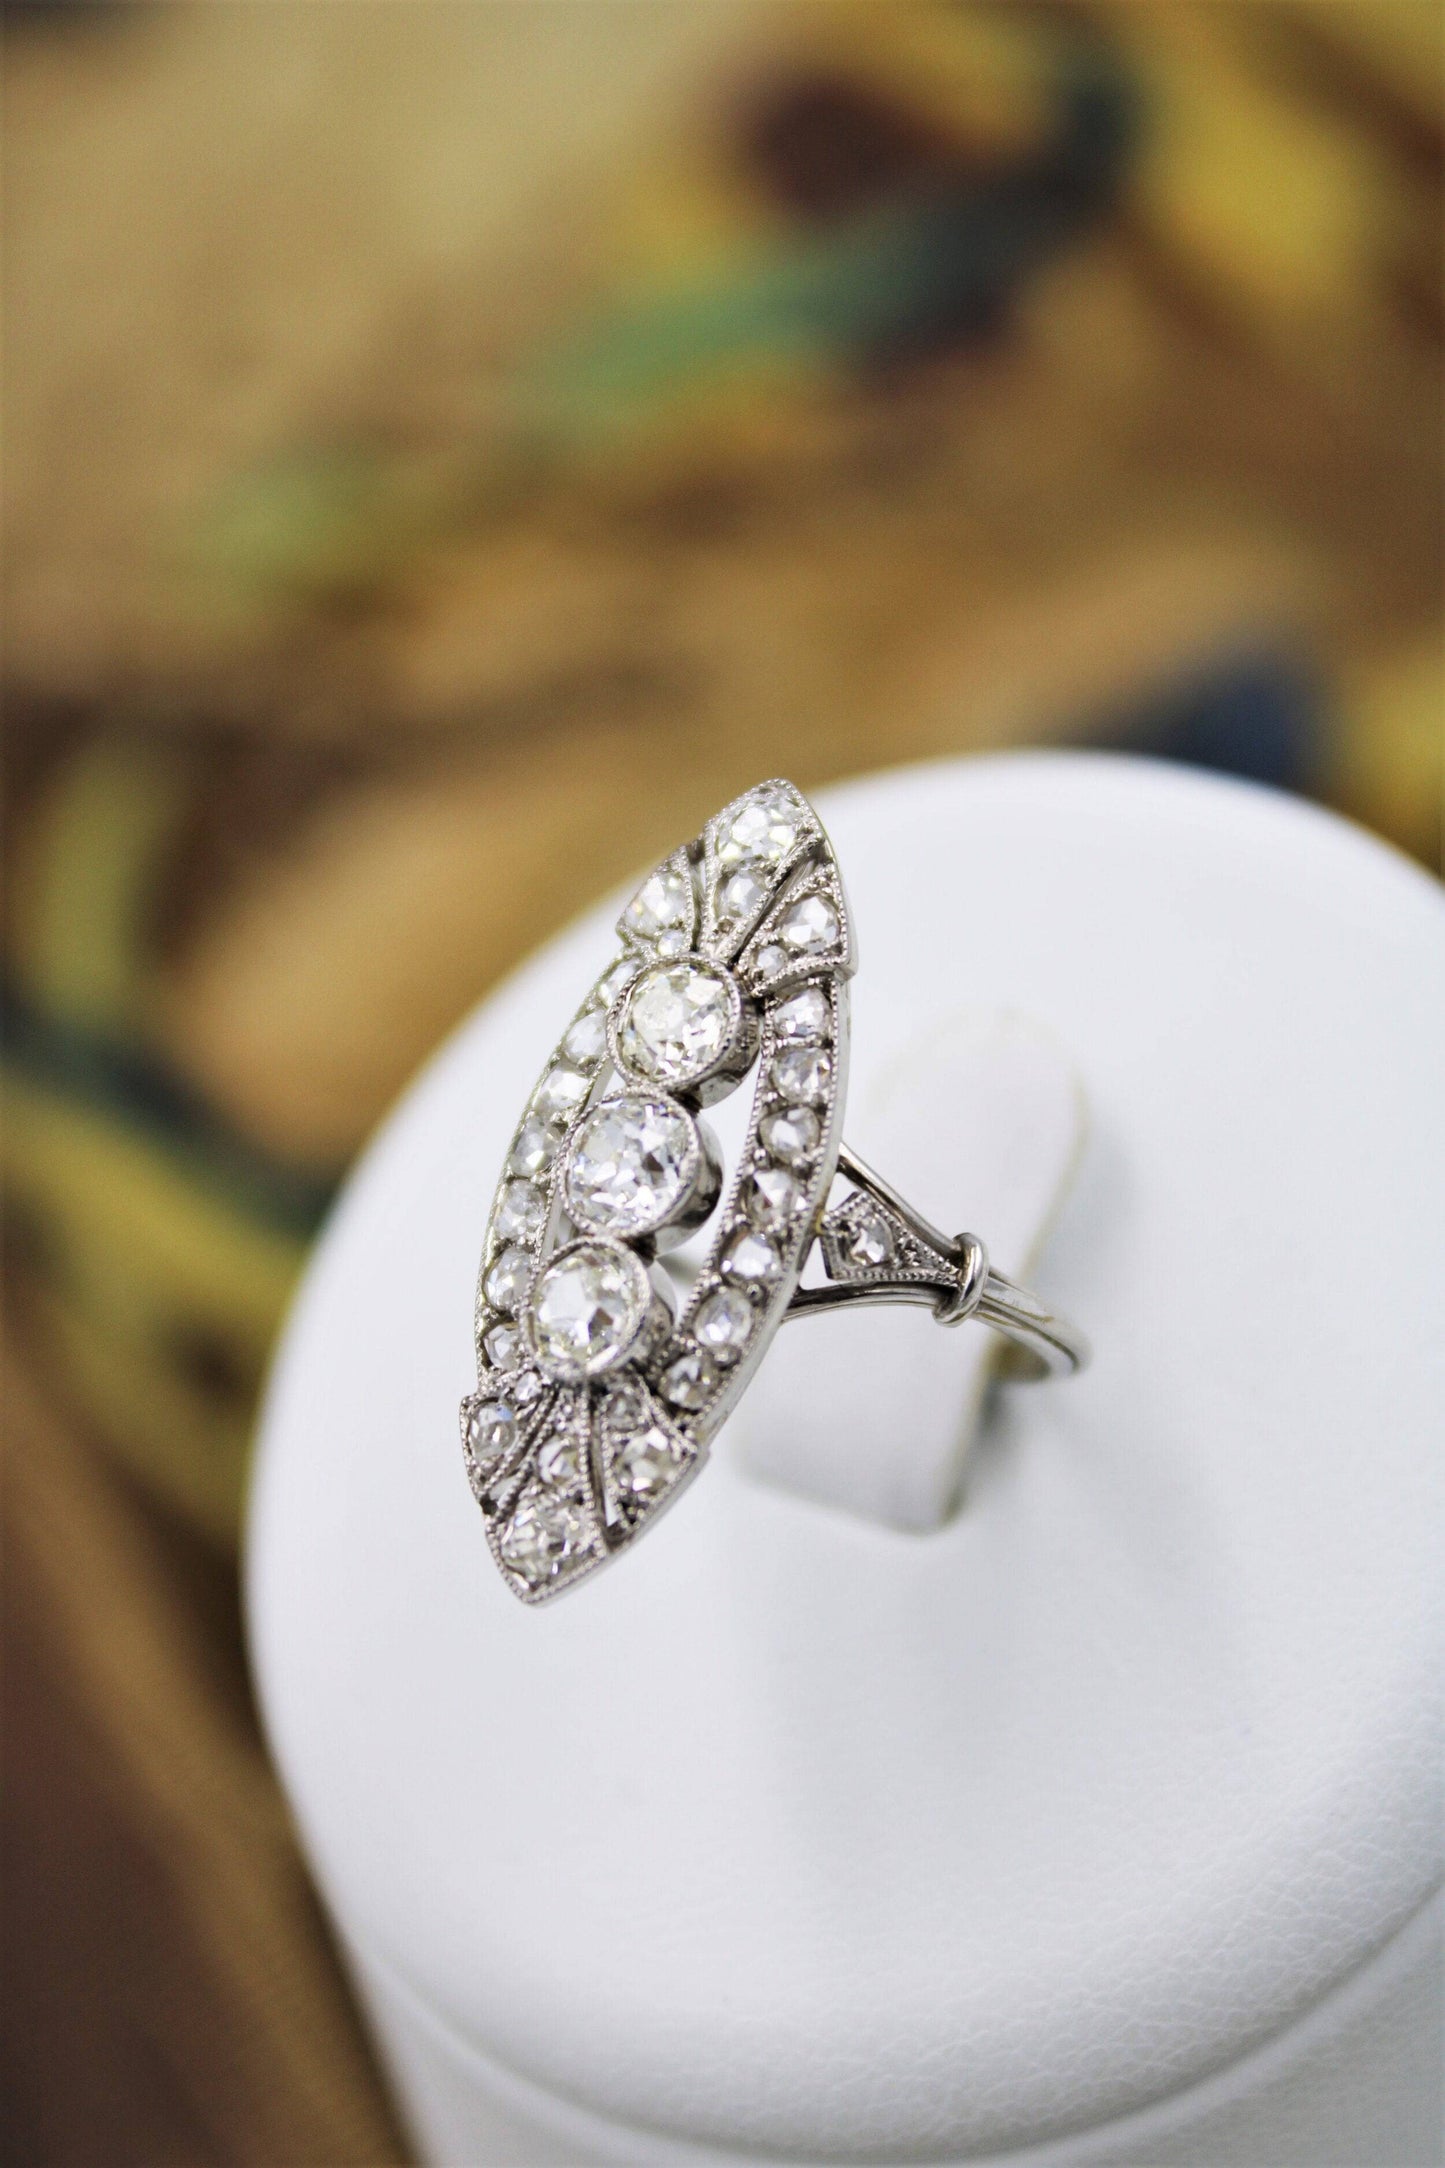 An exceptional Diamond "Navette" Ring mounted in Platinum with French Import Marks, Circa 1920 - Robin Haydock Antiques